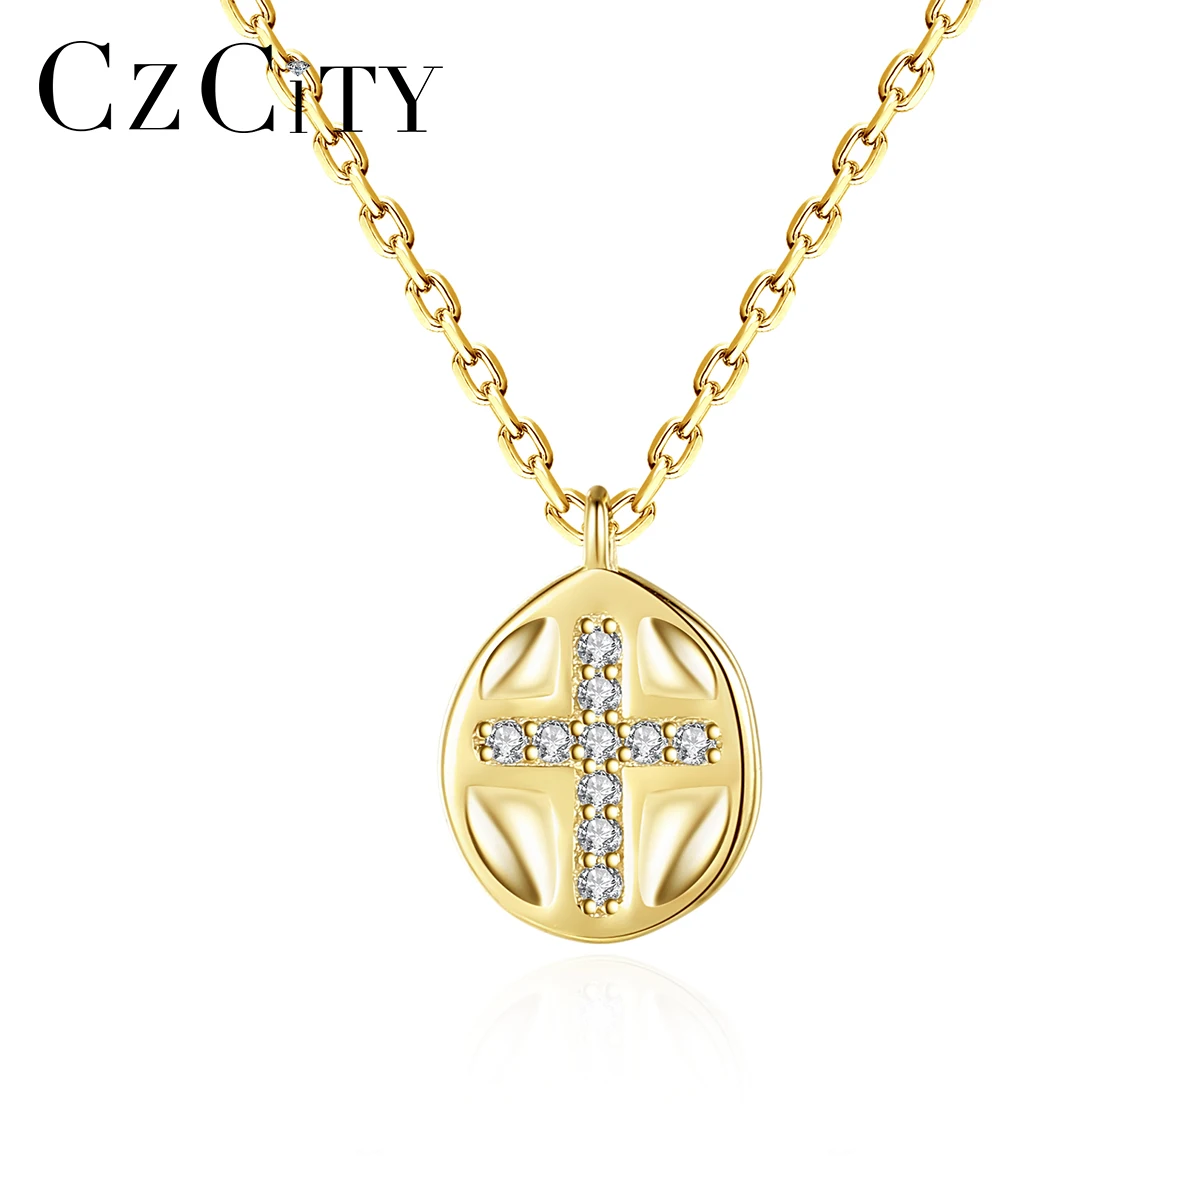 

CZCITY Necklace Chain Gold 925 Sterling Silver Plated Jewelry Woman Charm Trendy Minimalist Coin Pendant